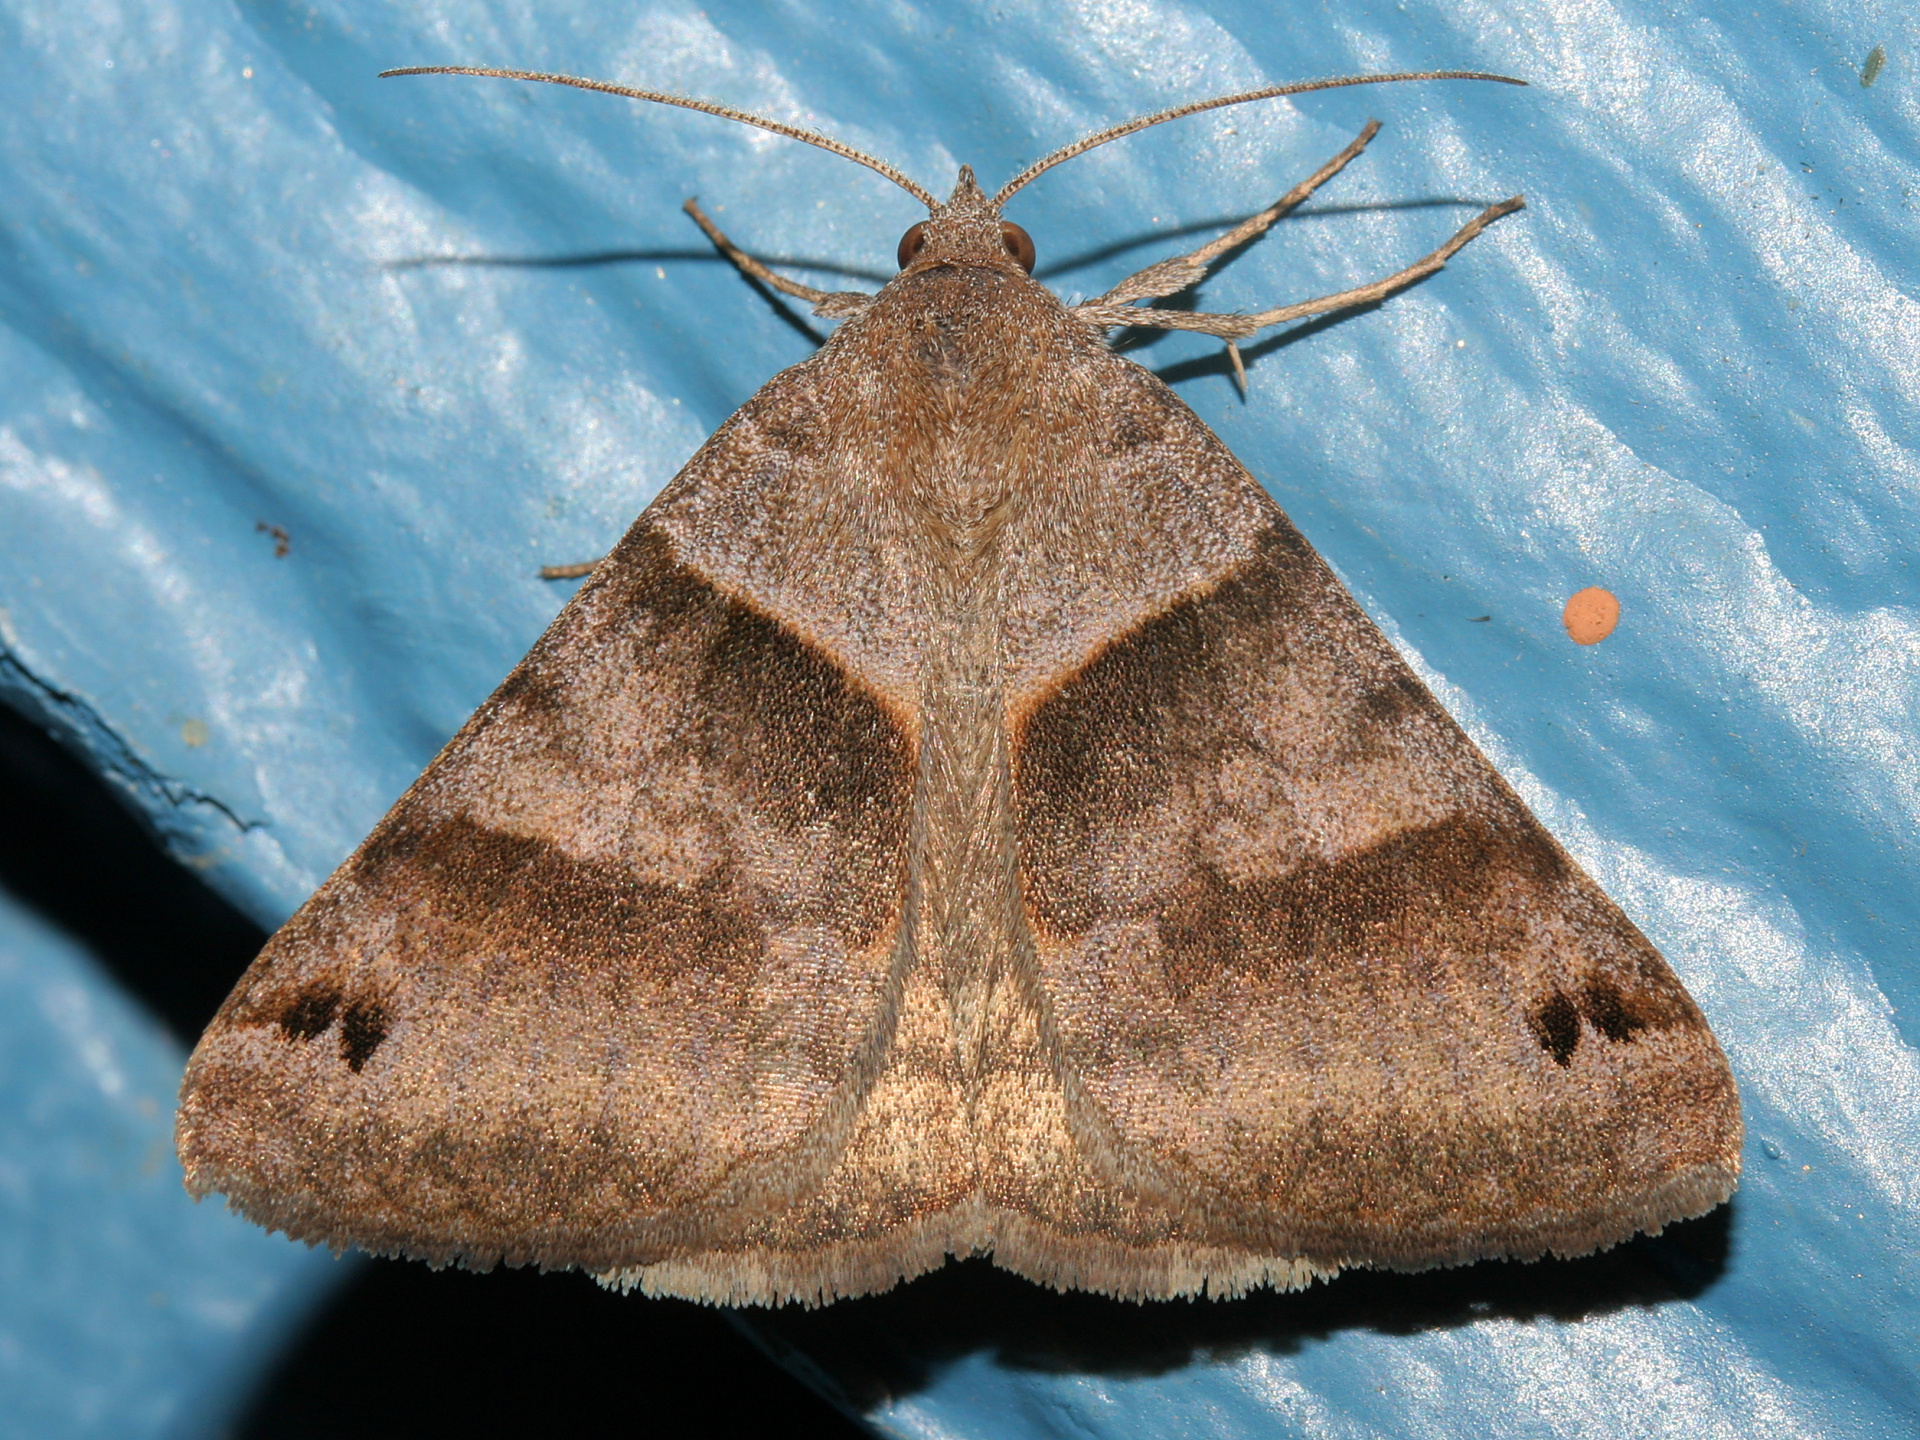 Caenurgina erechtea (Travels » US Trip 2: Cheyenne Epic » Animals » Insects » Butterfies and Moths » Noctuidae)